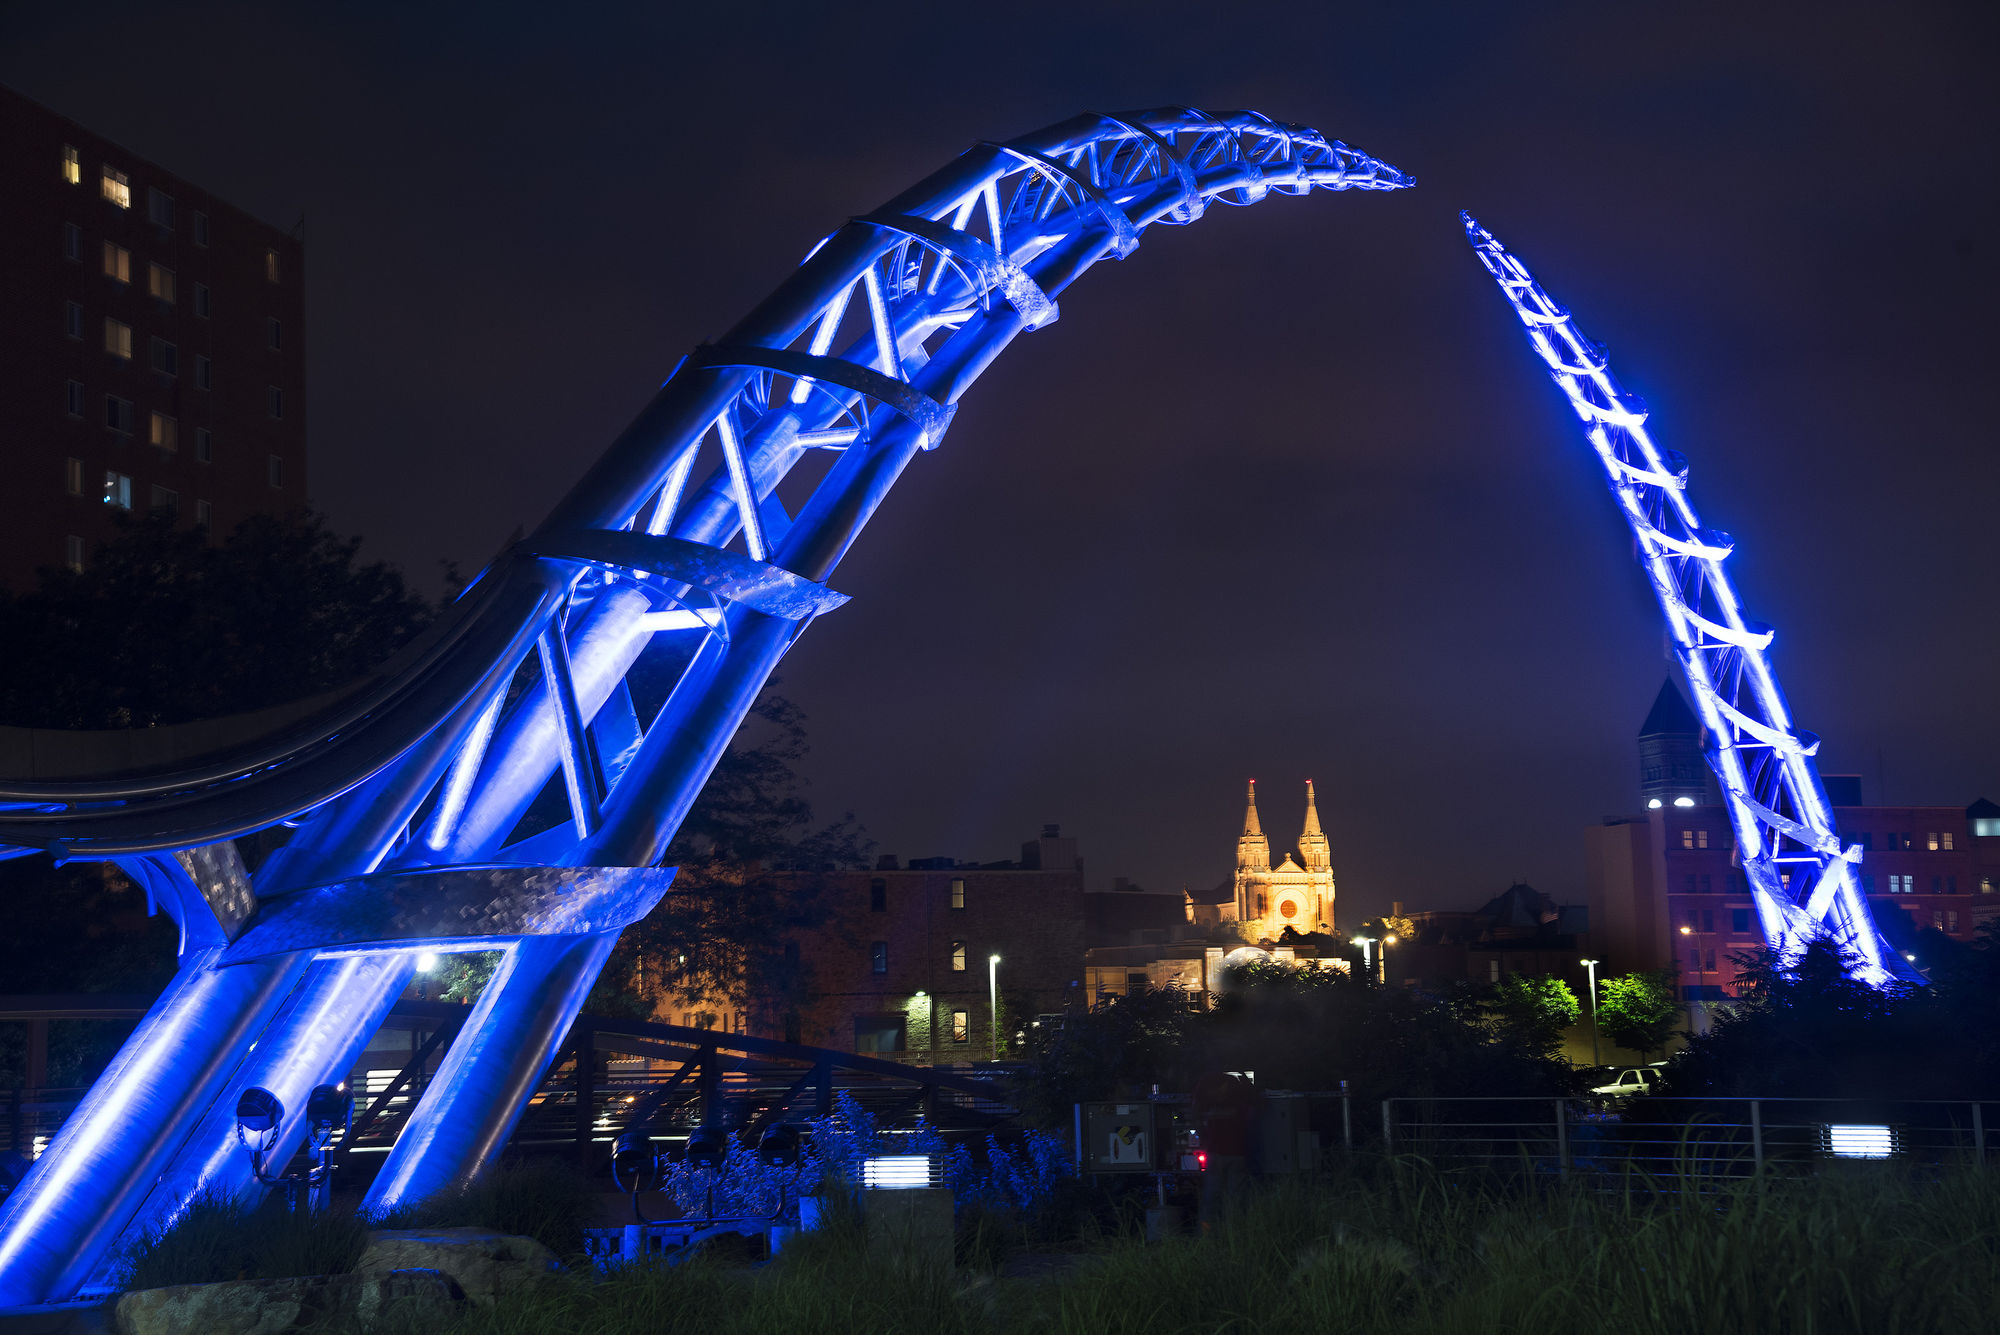 Arc of Dreams, Dale Lamphere, Sioux Falls, SD